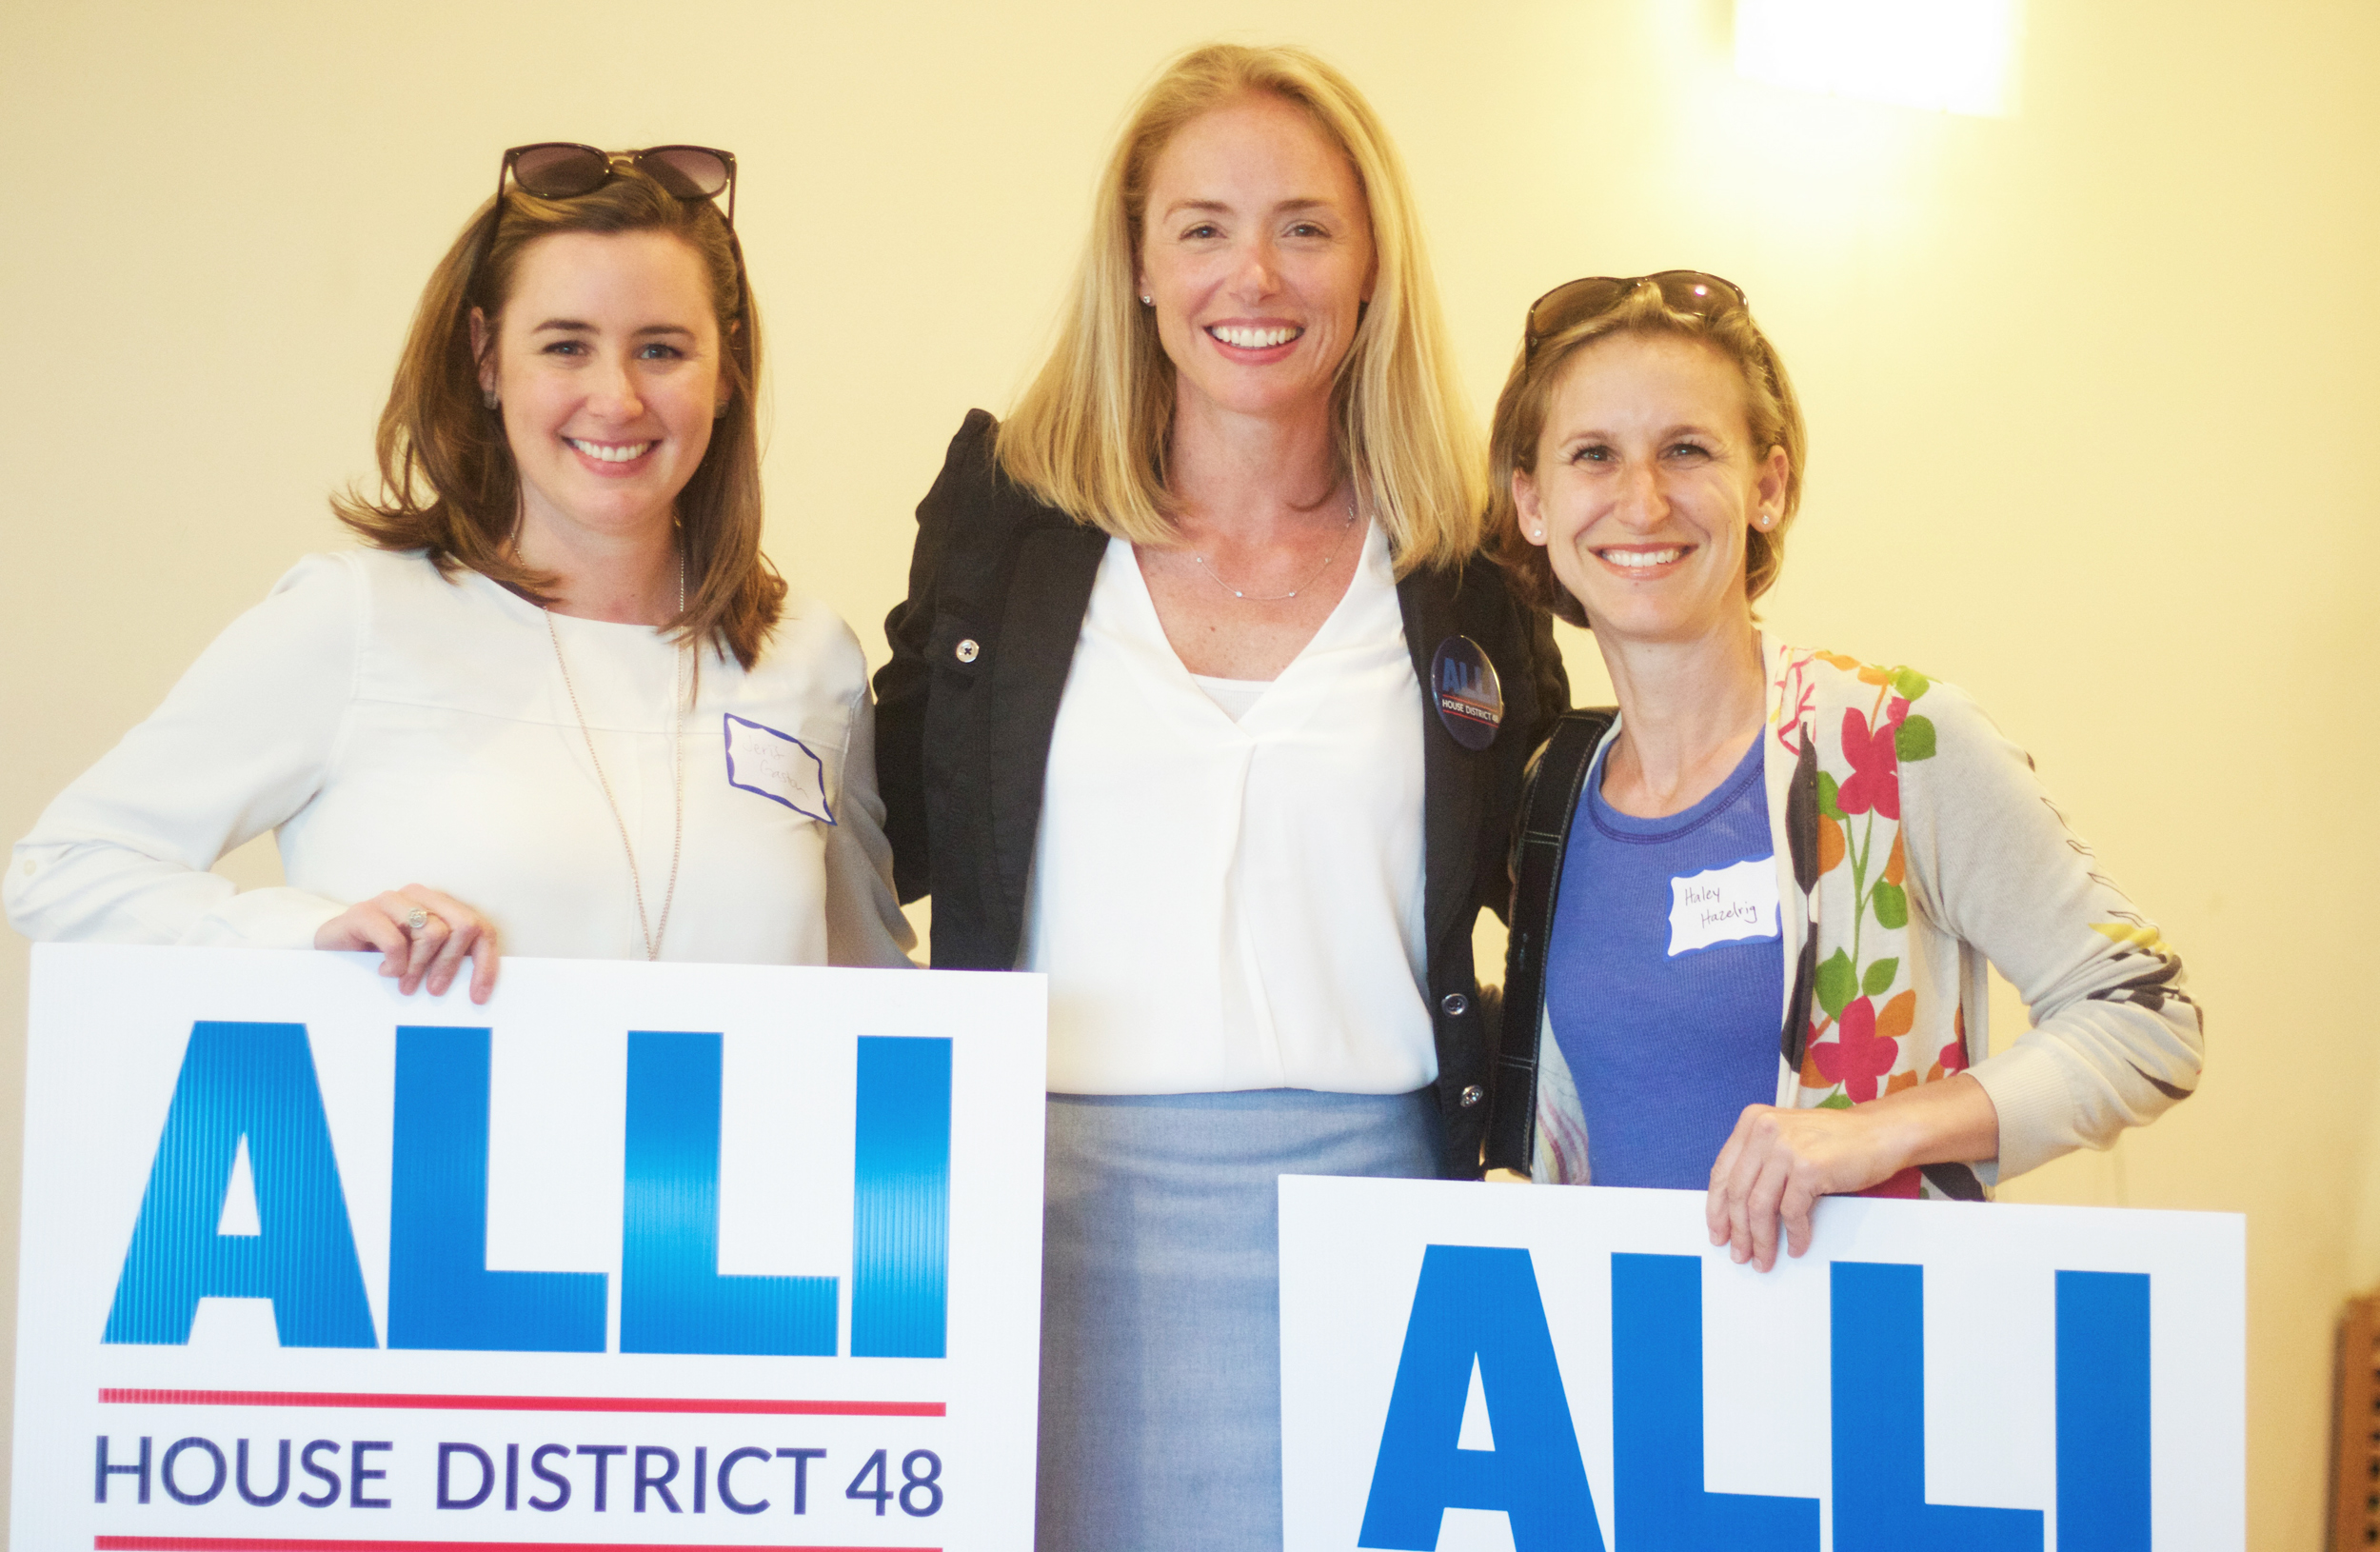 PHOTO: Alli Summerford, center, poses with two supporters.